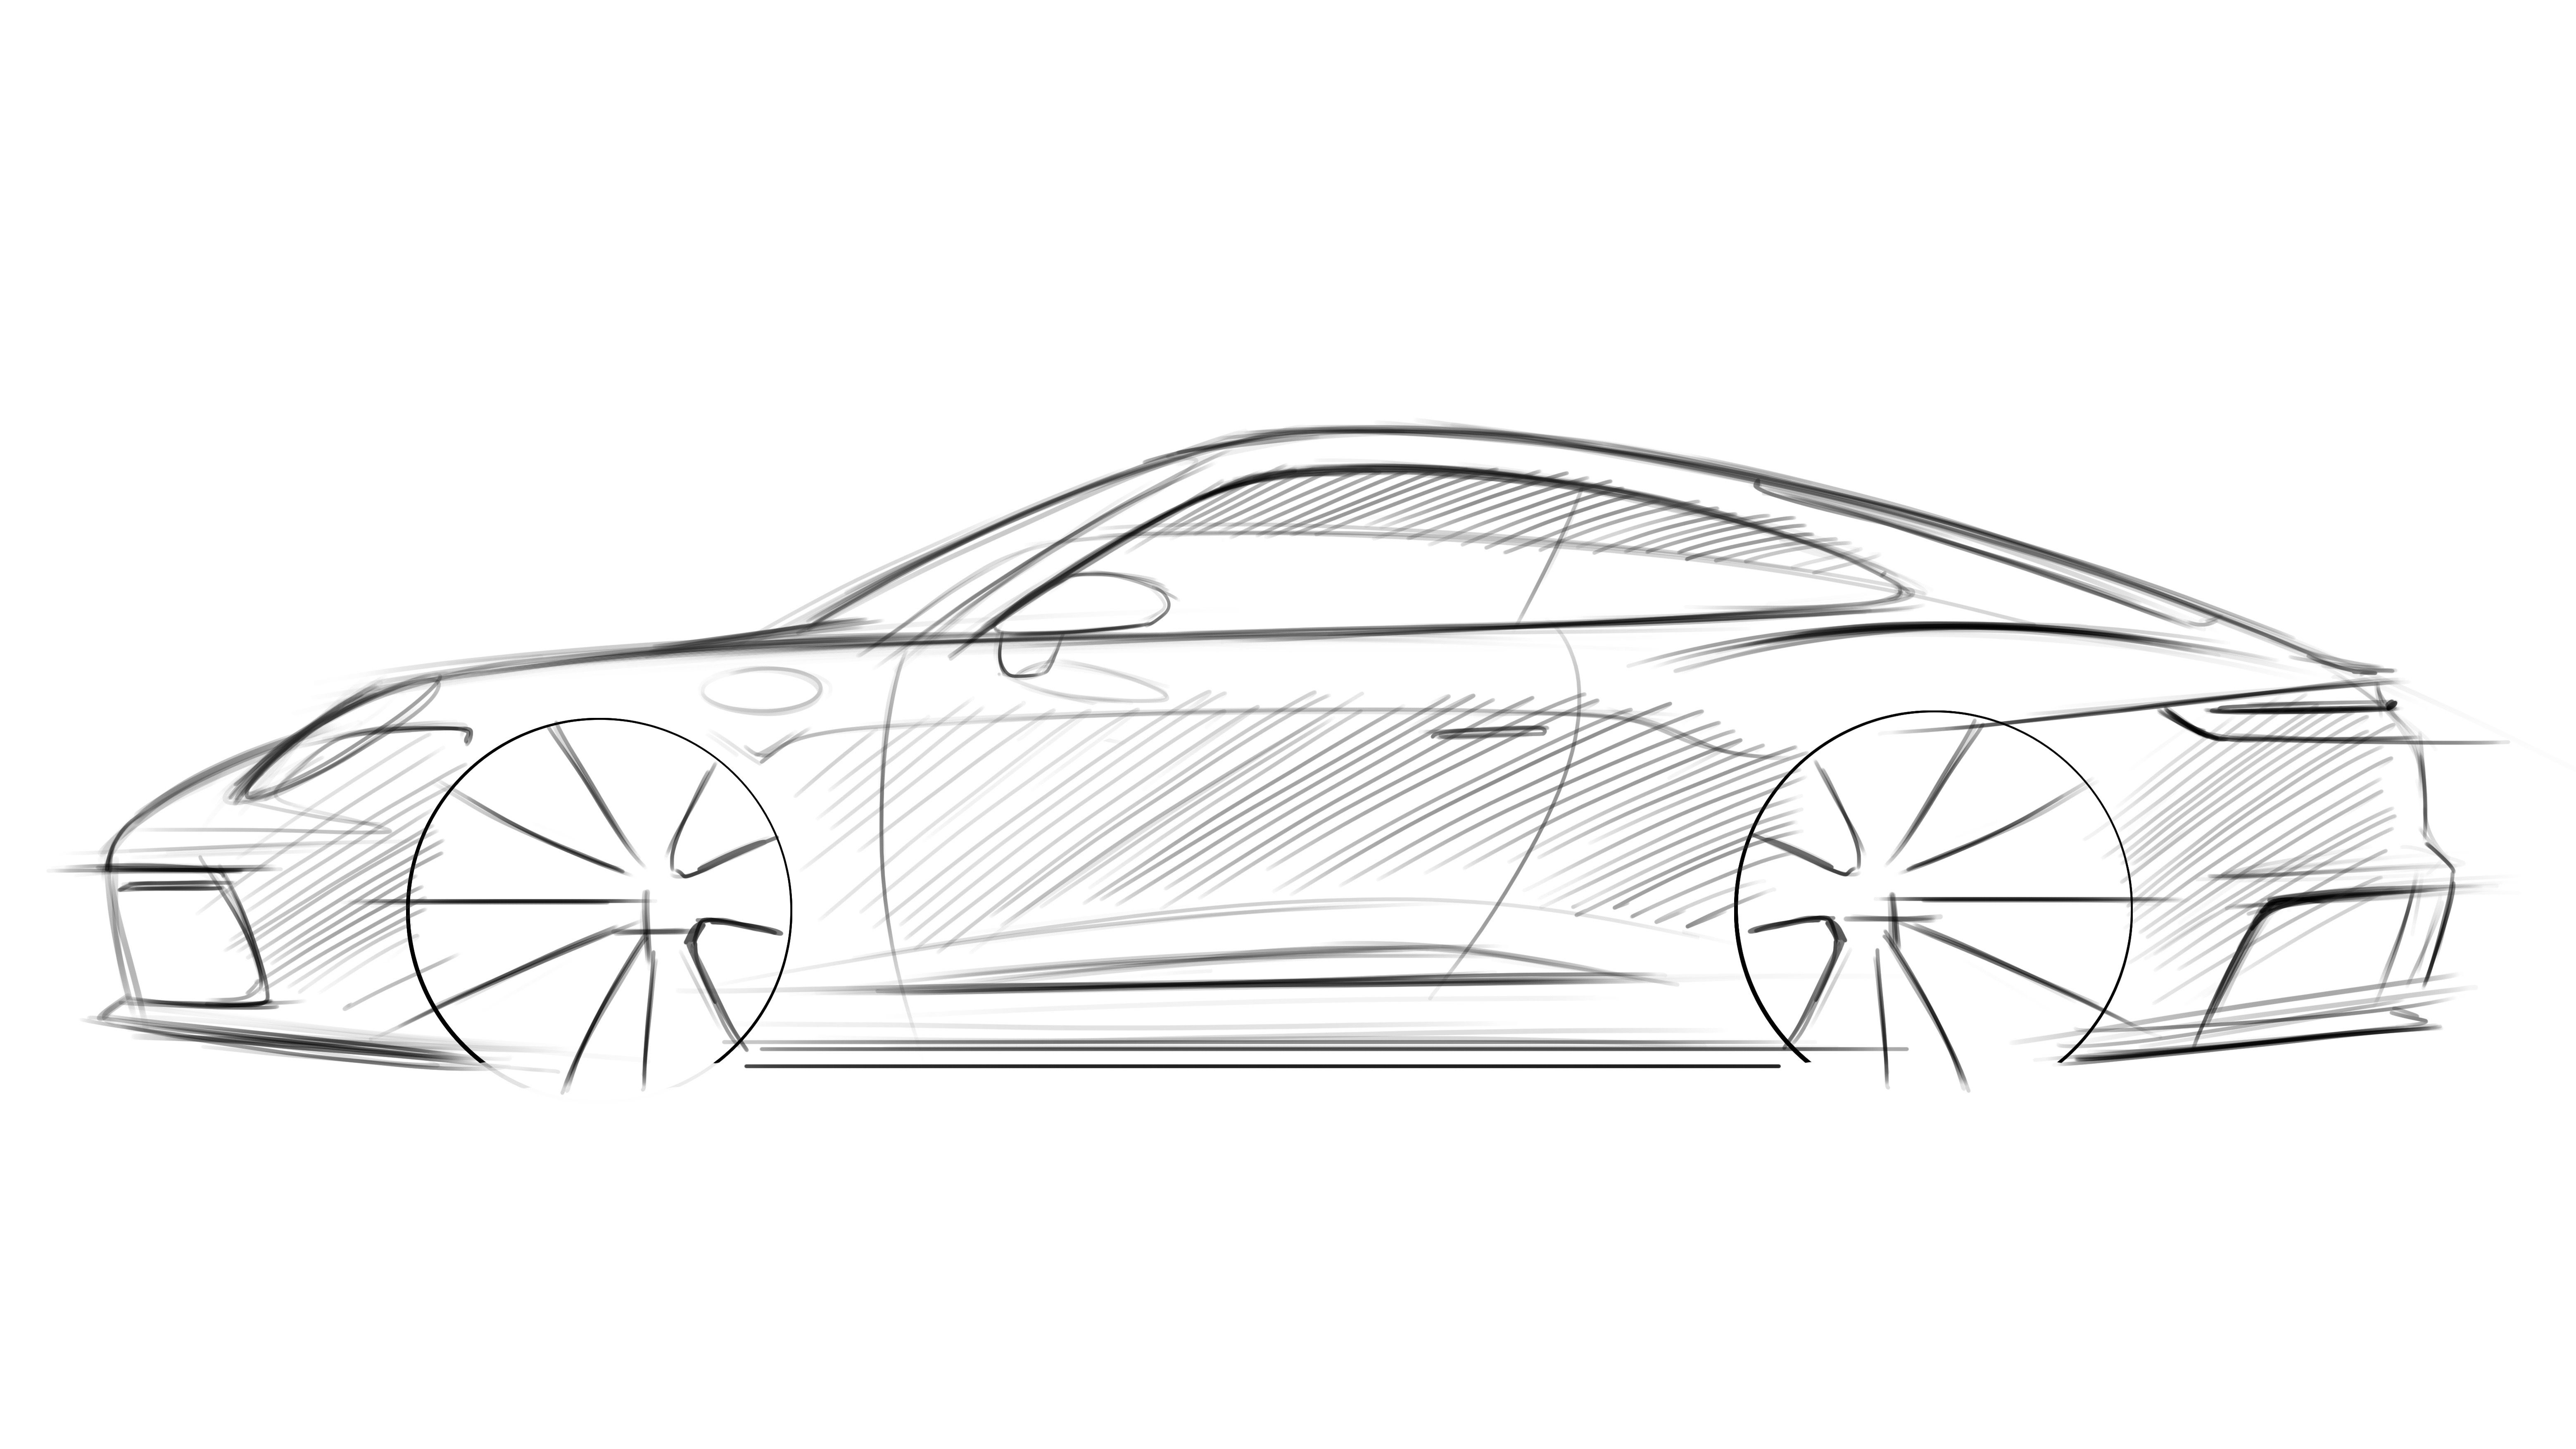 249,252 Car Drawing Images, Stock Photos, 3D objects, & Vectors |  Shutterstock